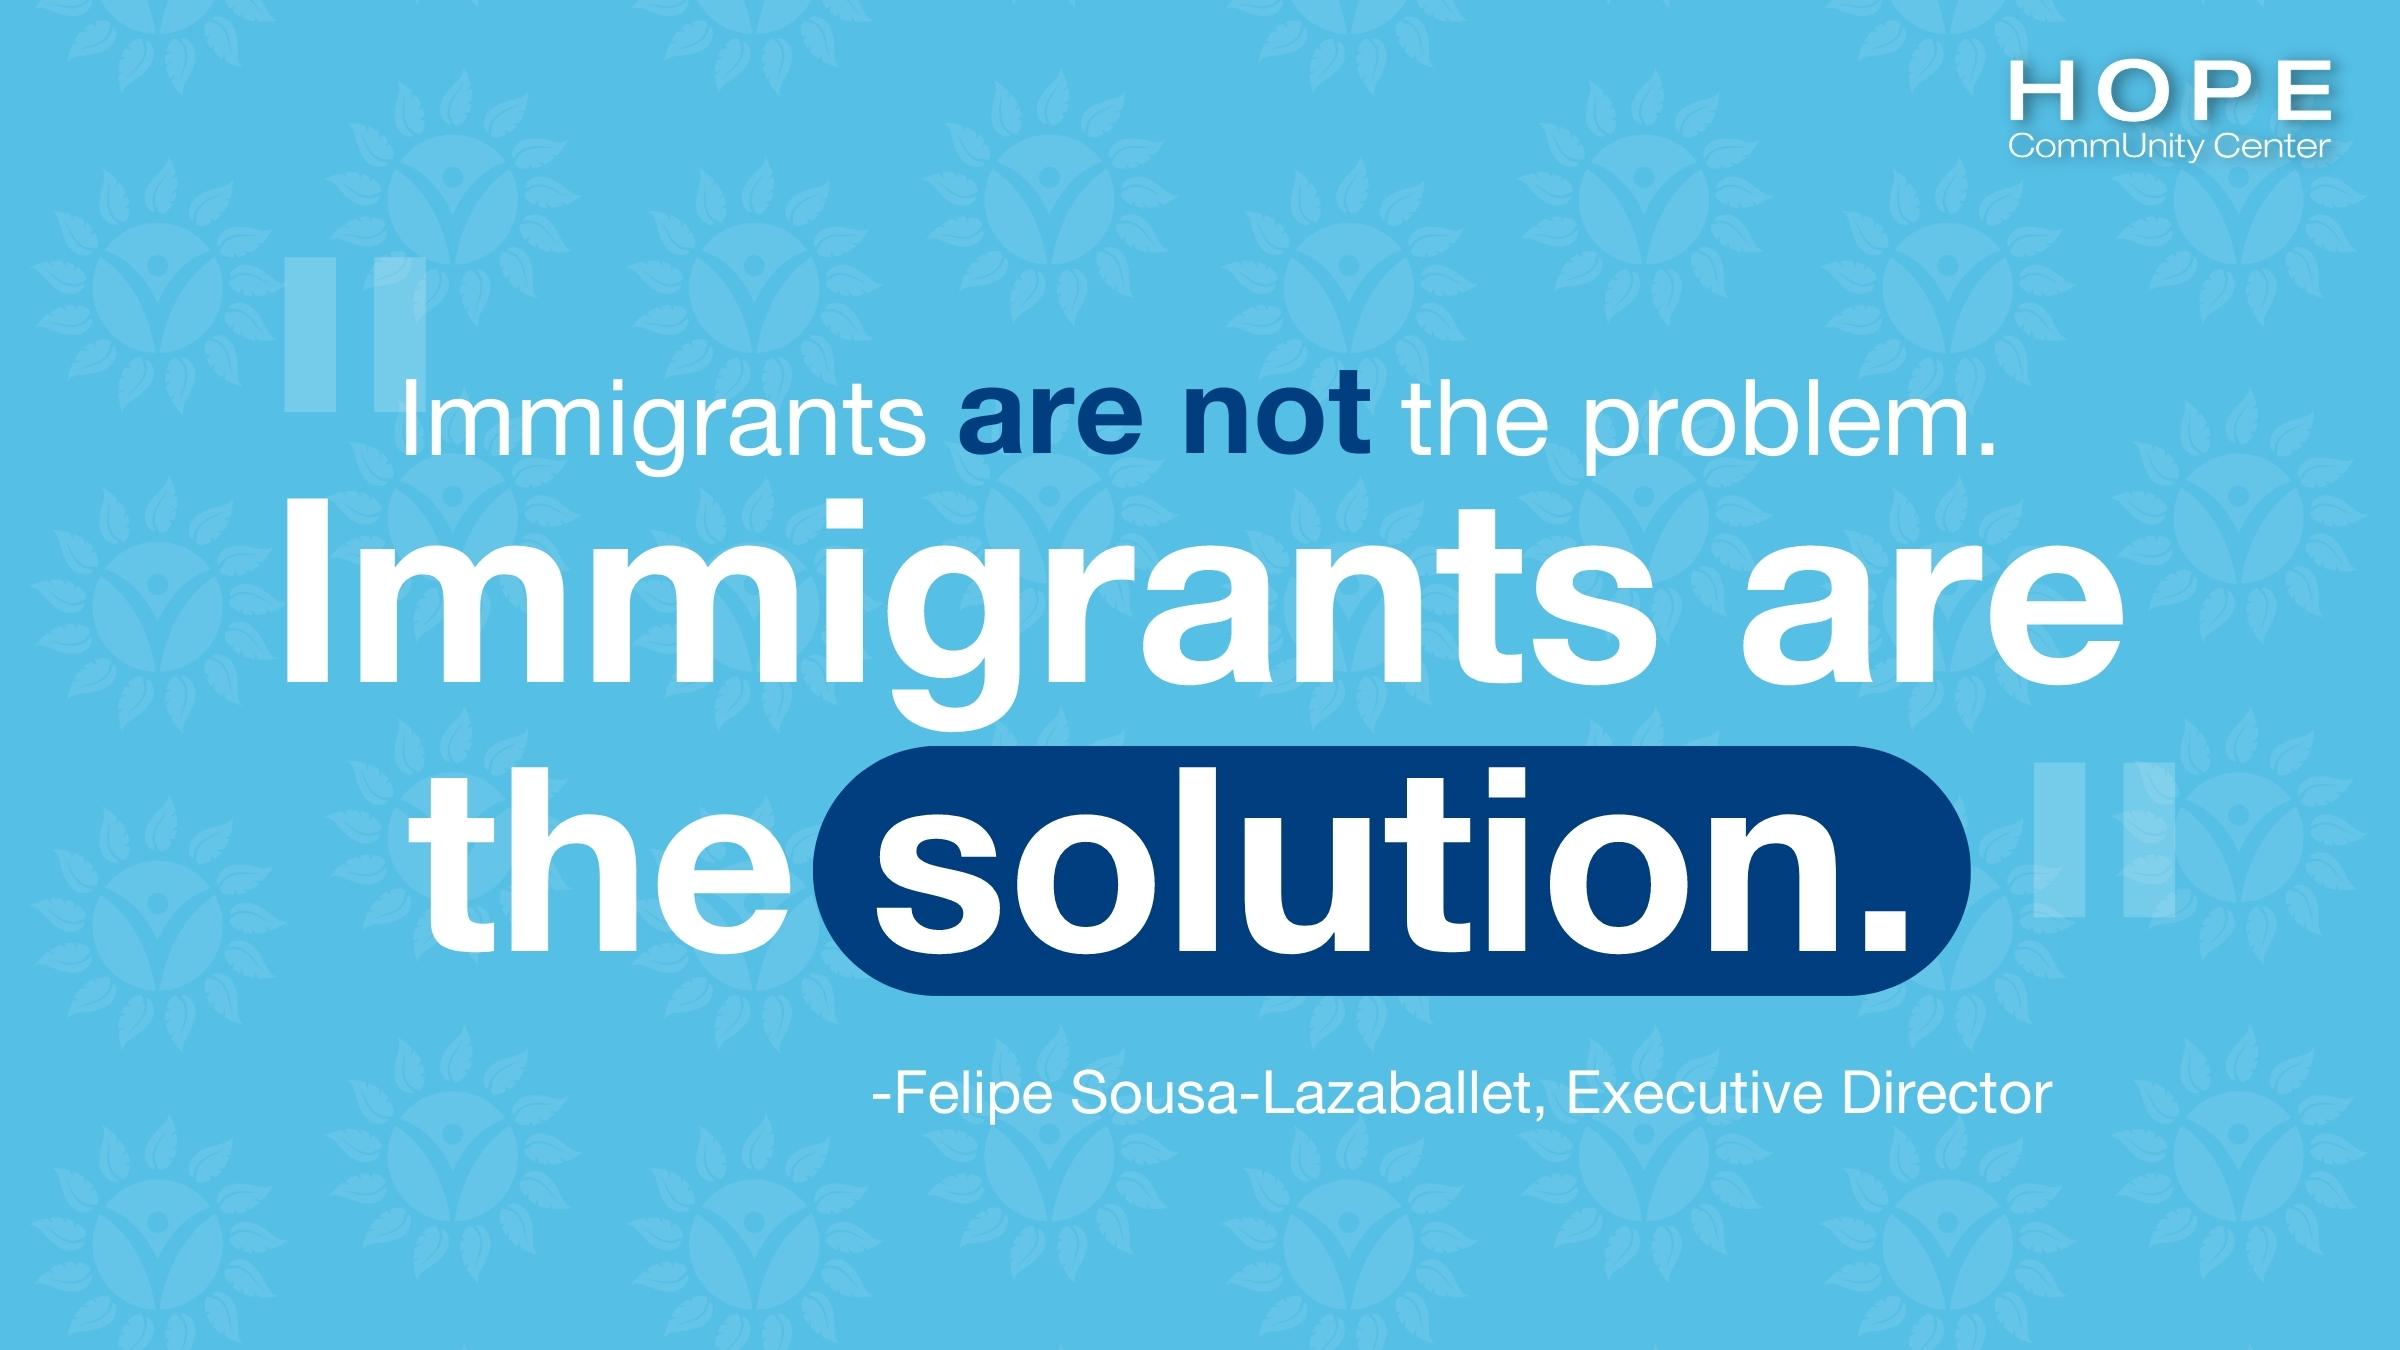 Immigrants: The Solution for All Thriving Communities